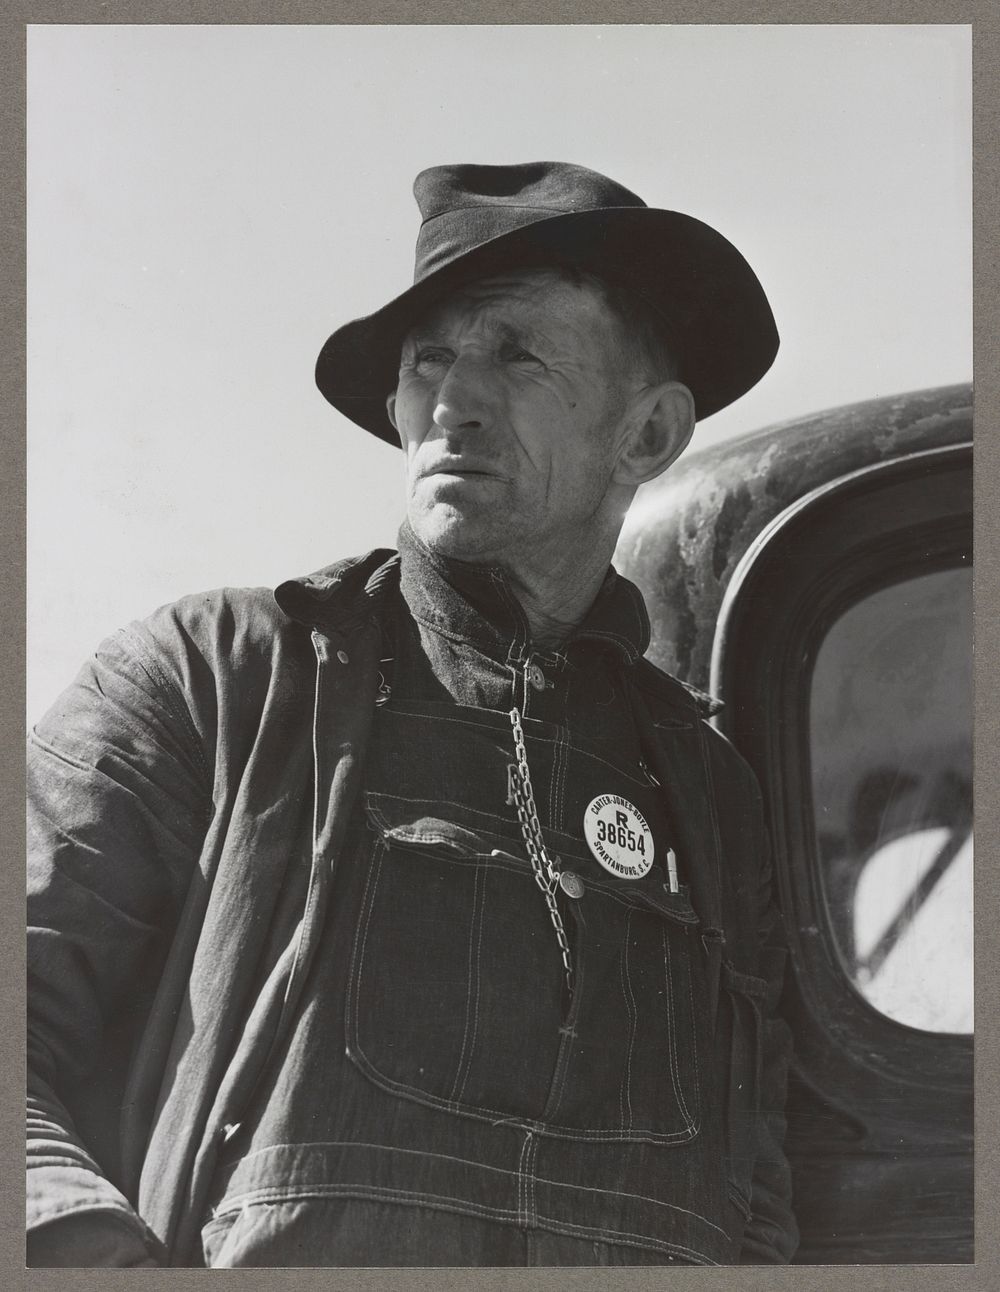 Farmer who had to move out of the Camp Croft area. He had a job at the camp. Whitestone, South Carolina. Sourced from the…